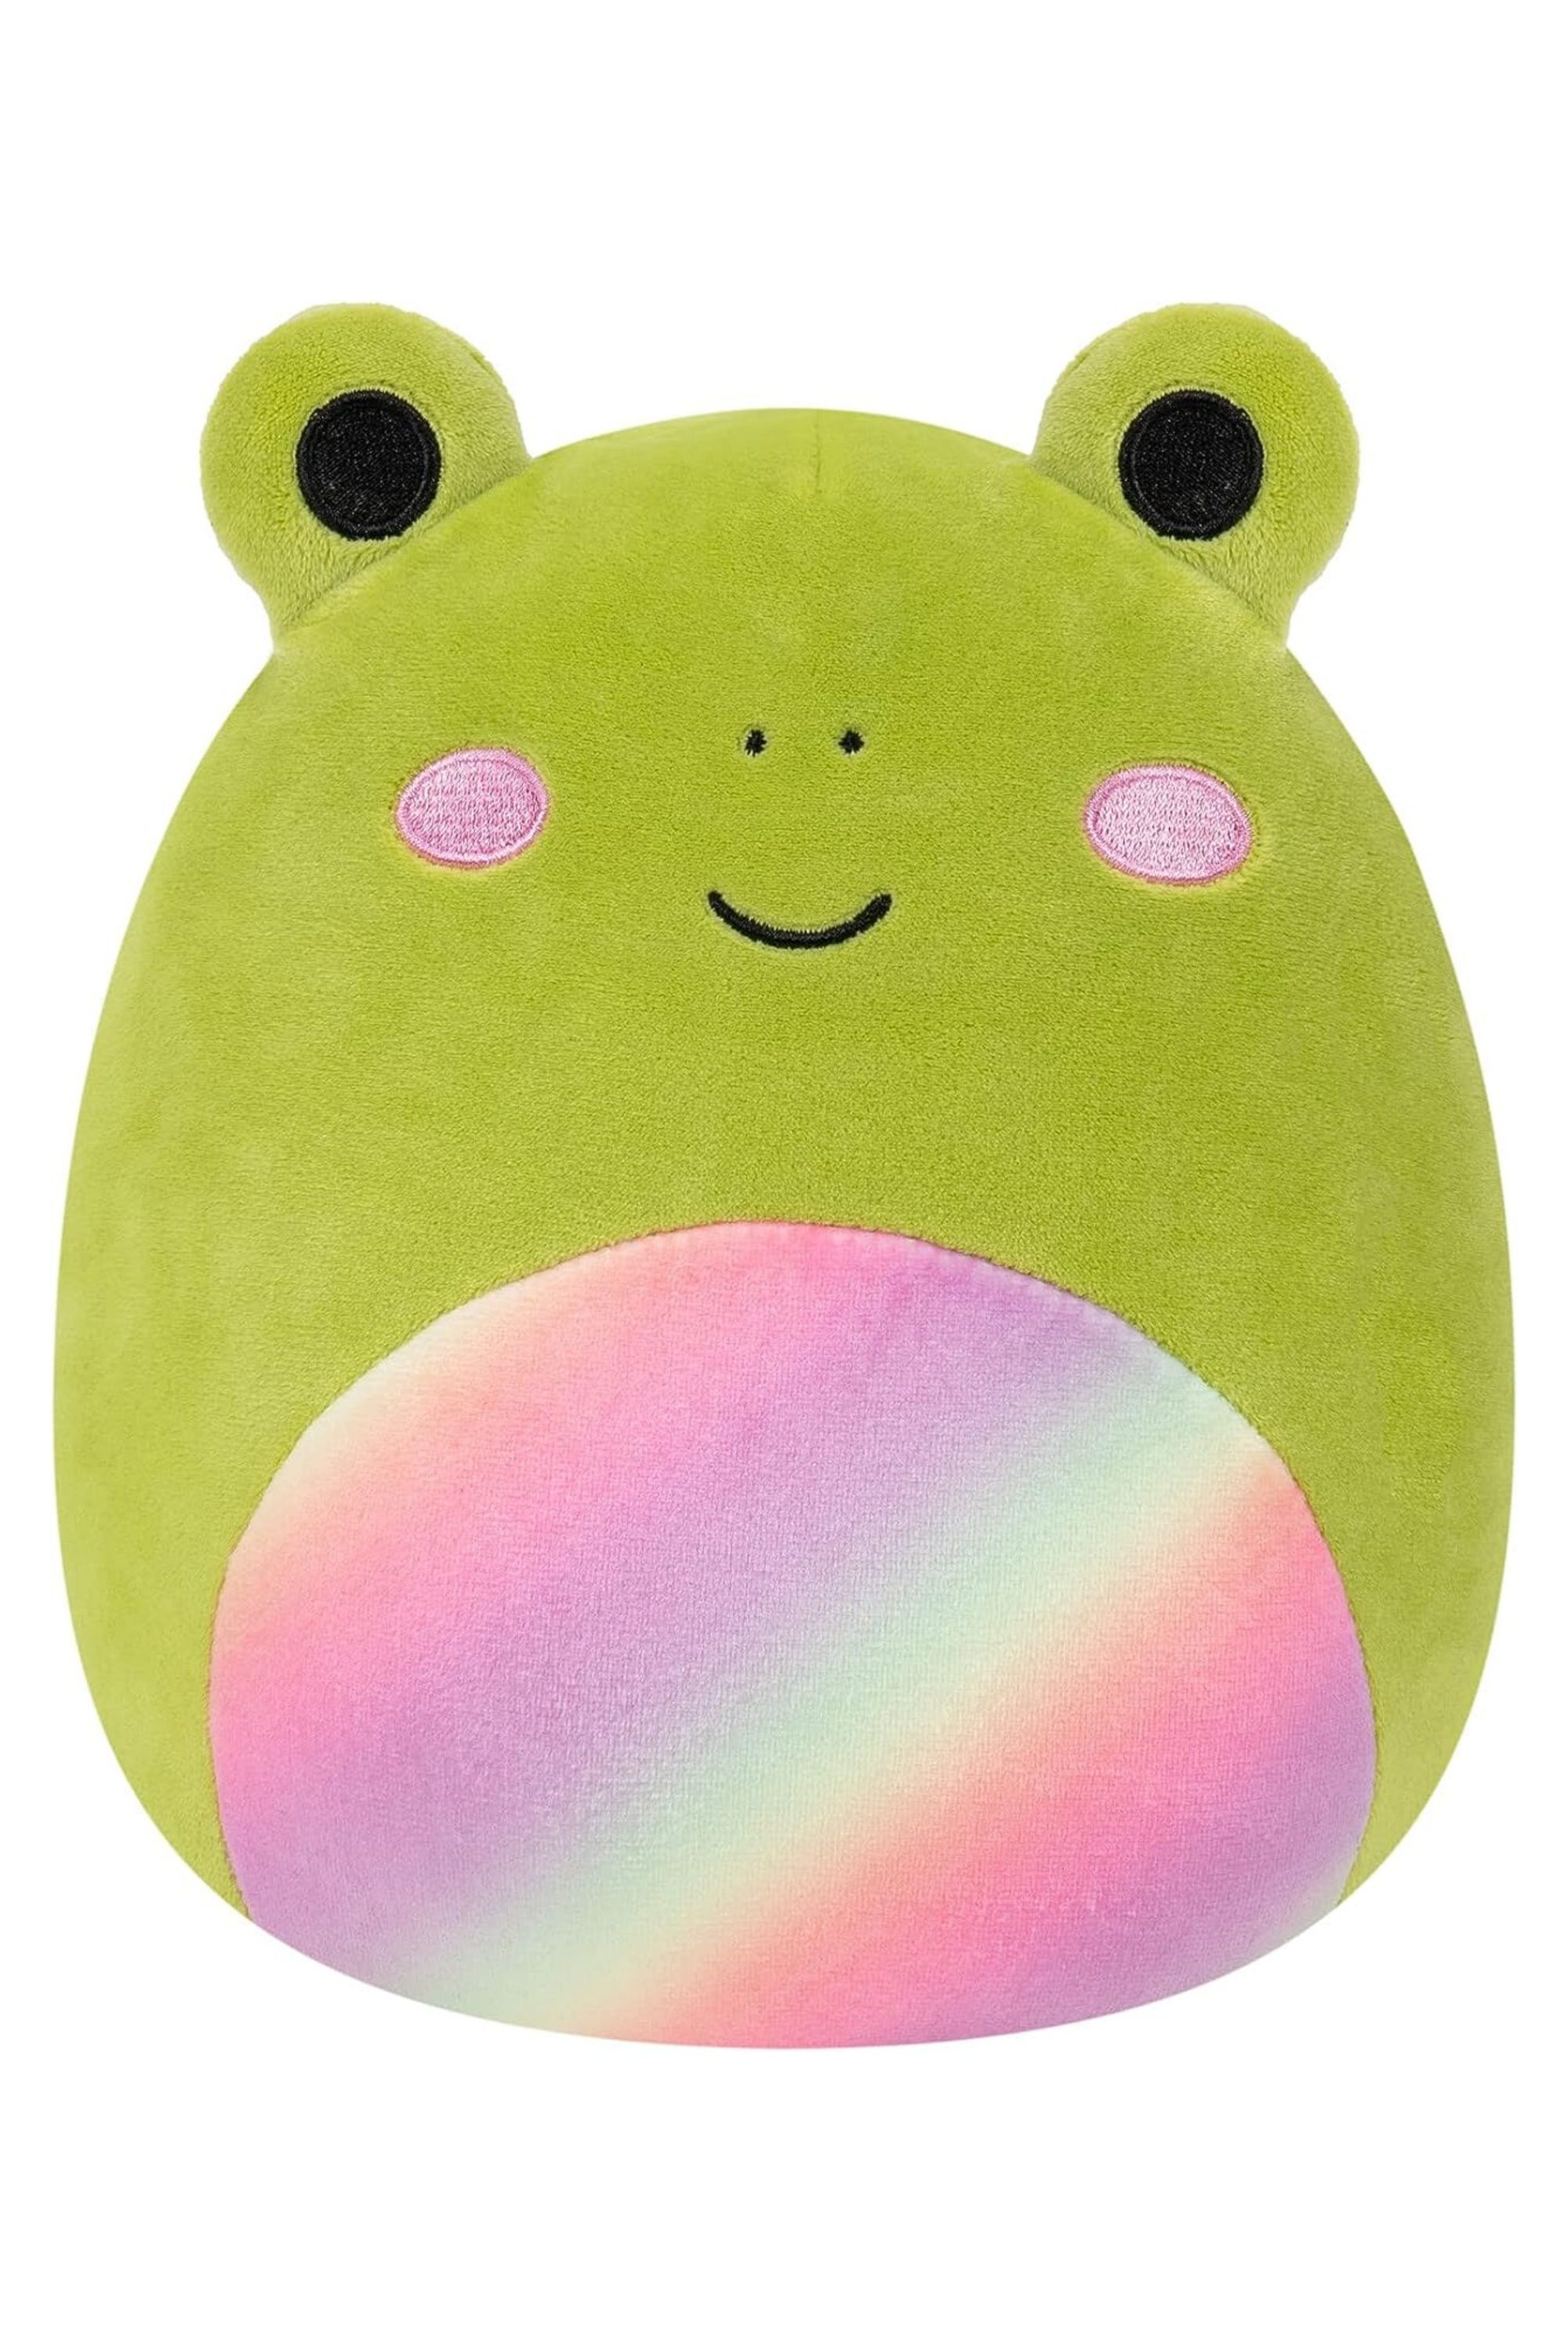 Doxl The Rainbow Frog Squishmallow